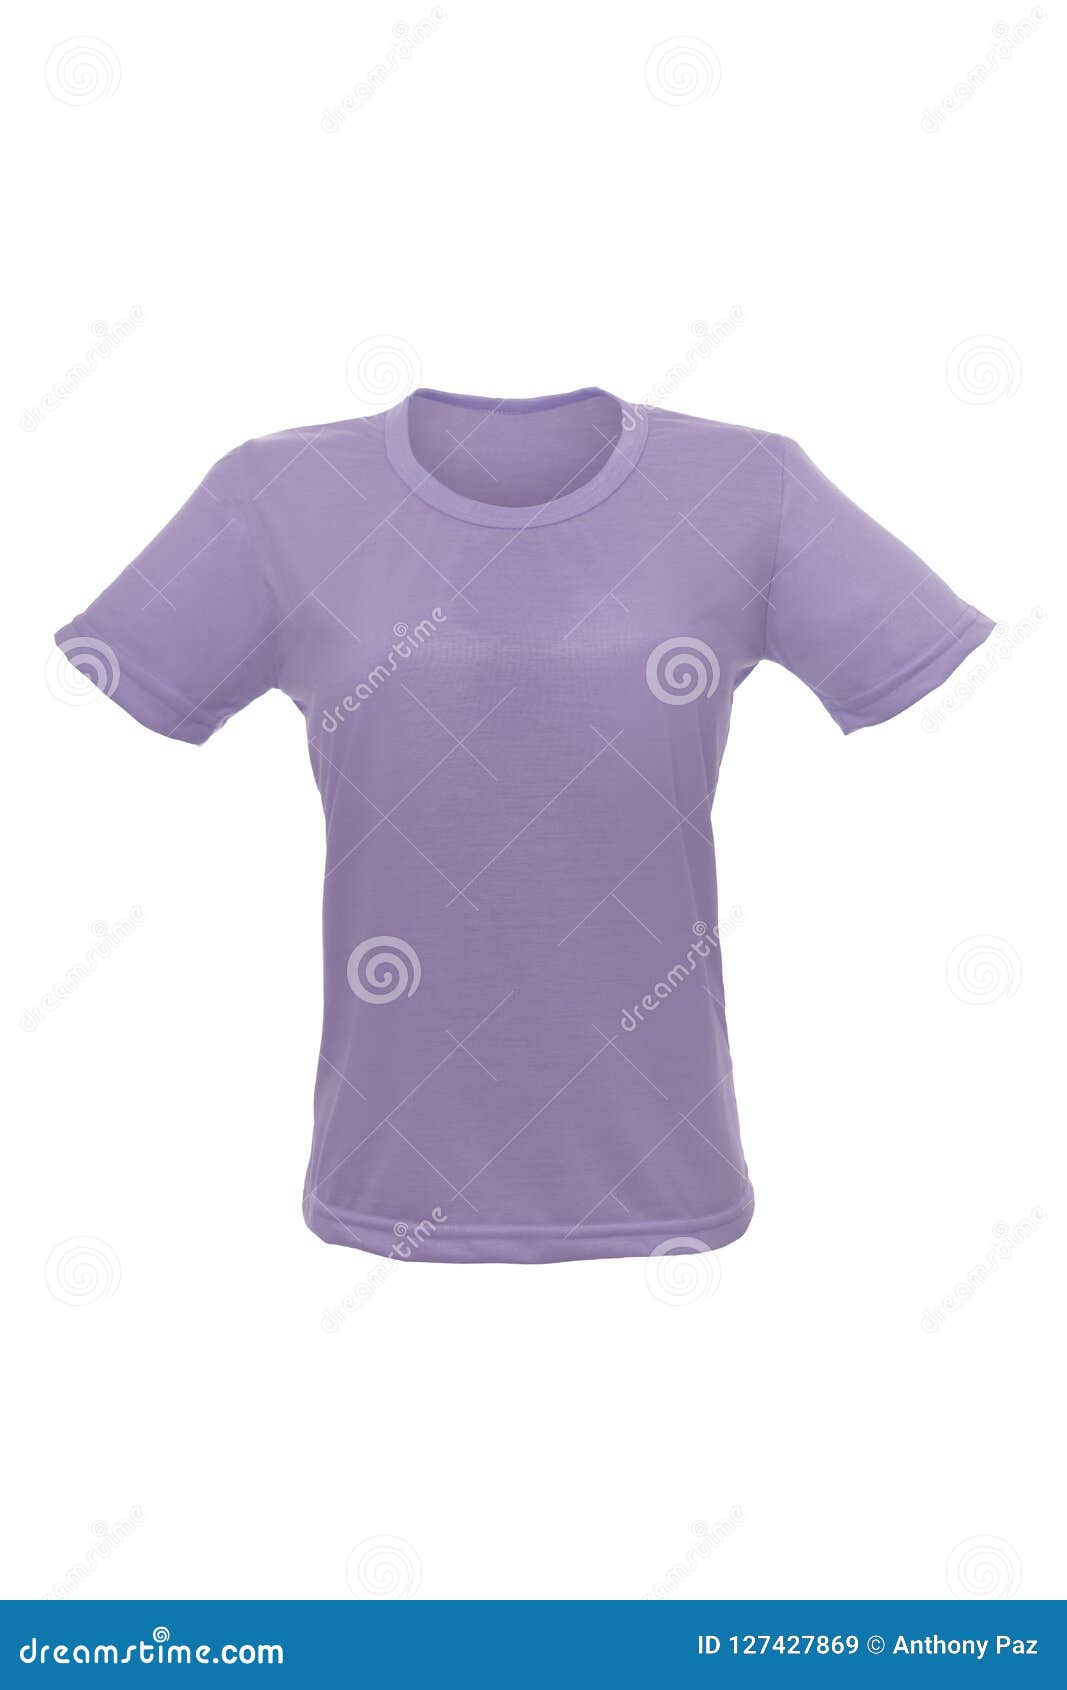 Download Mockup Of A Template Of A Woman& X27;s T-shirt On A White ...